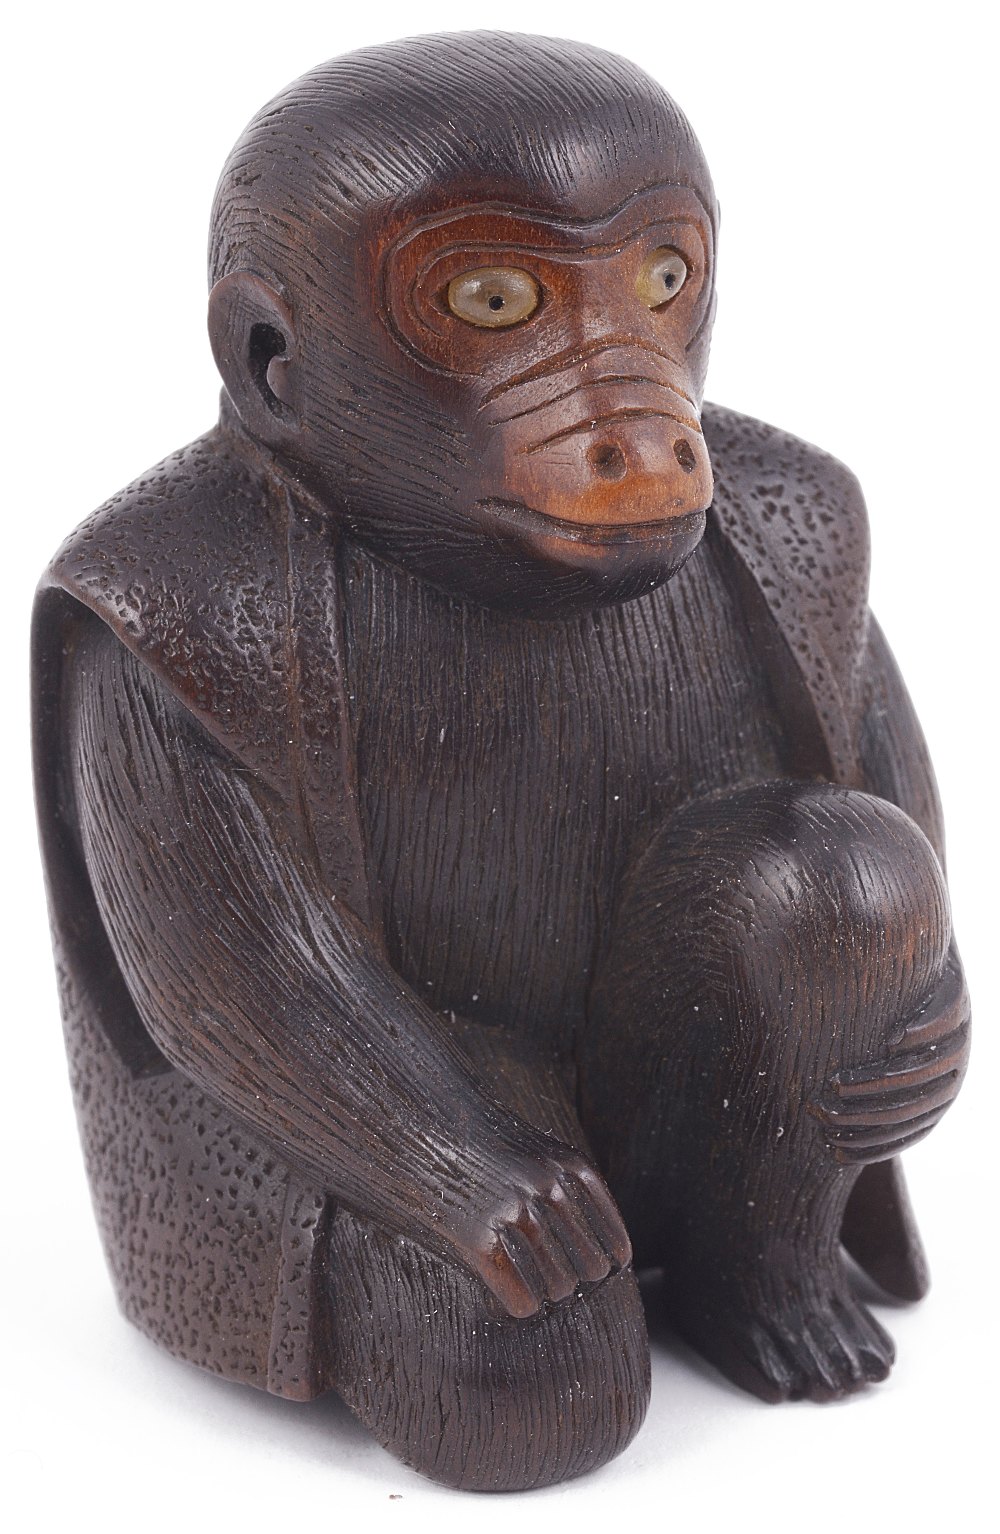 WOOD NETSUKE OF A SEATED PERFORMING MONKEY, CIRCA 1870 wearing a jacket, and with inlaid horn